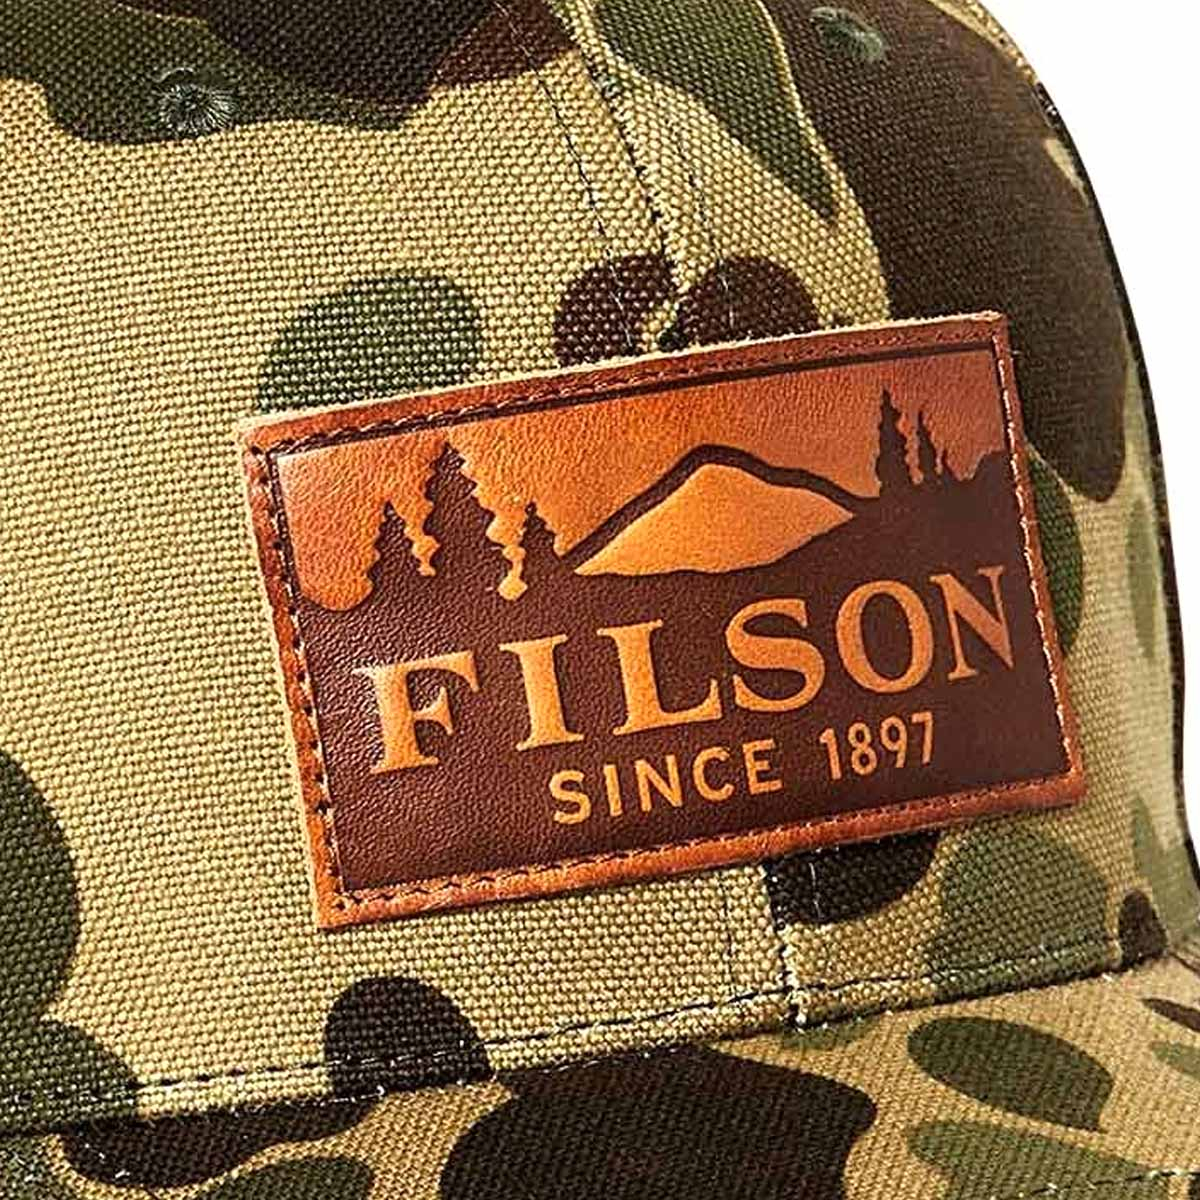 Filson Logger Cap Light Shrub Camo/Scenic, cap that protects your head from the elements